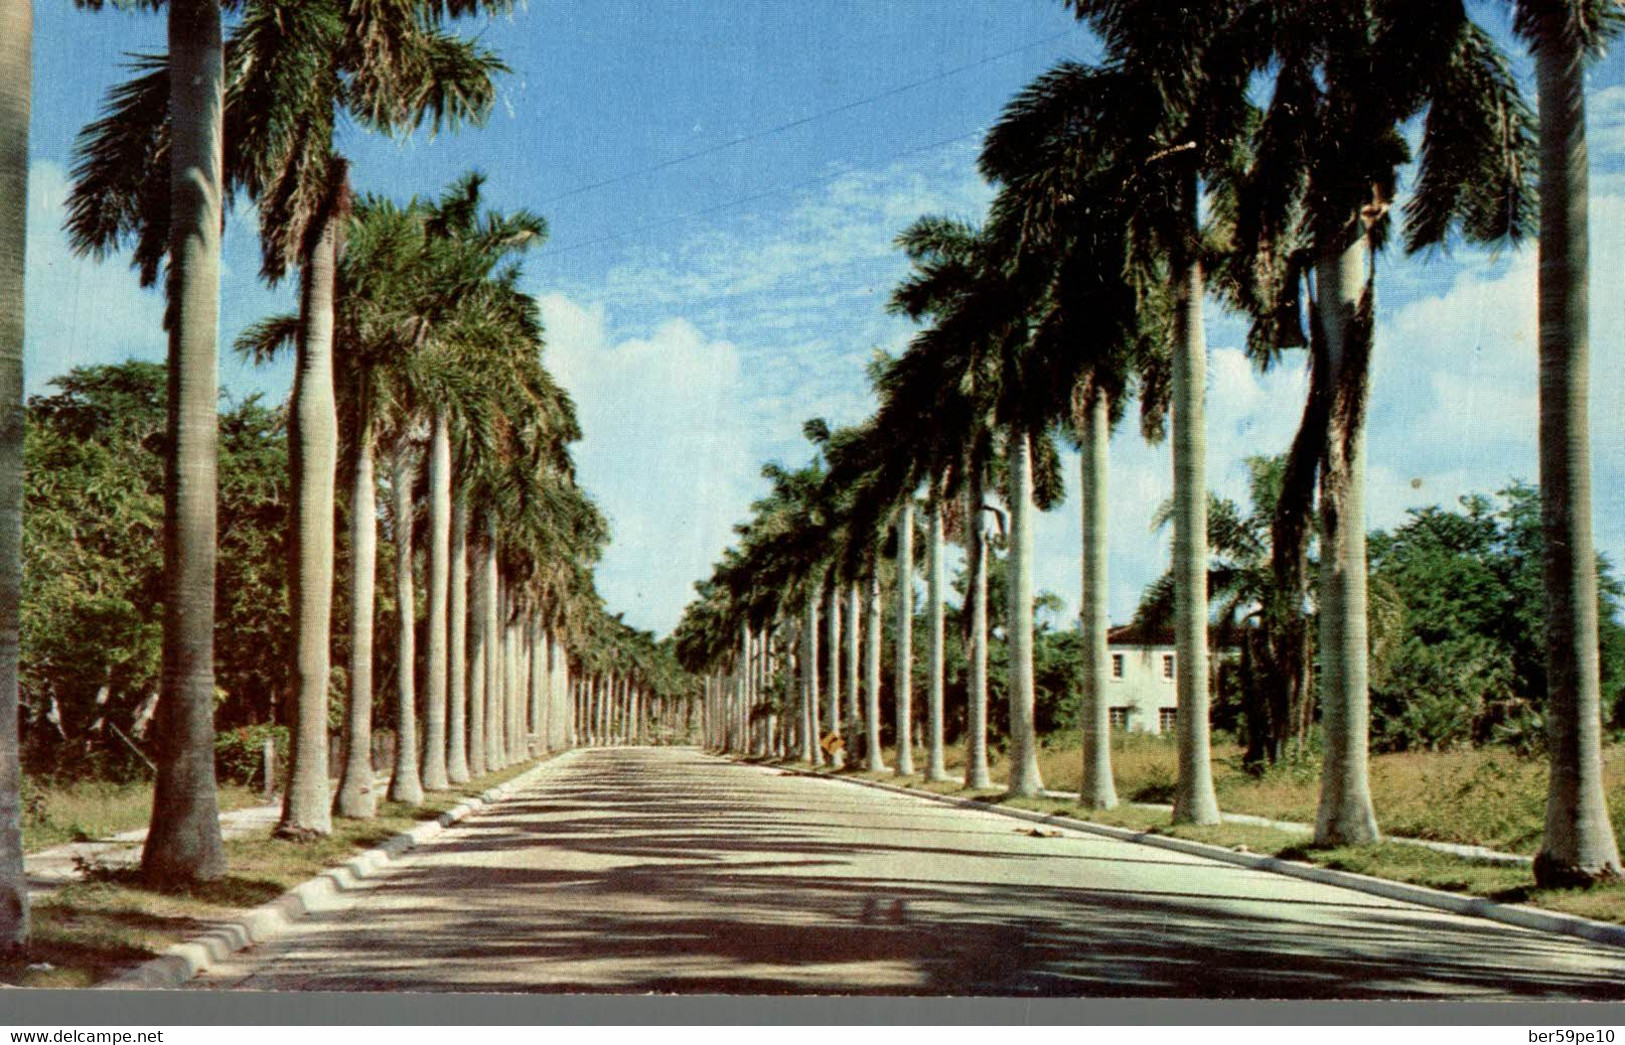 USA MAJESTIC ROYAL PALMS LINE A WIDE AND DISTINCTIVE AVENUE IN THIS SOUTHERN BEATY SCENE - Palm Beach